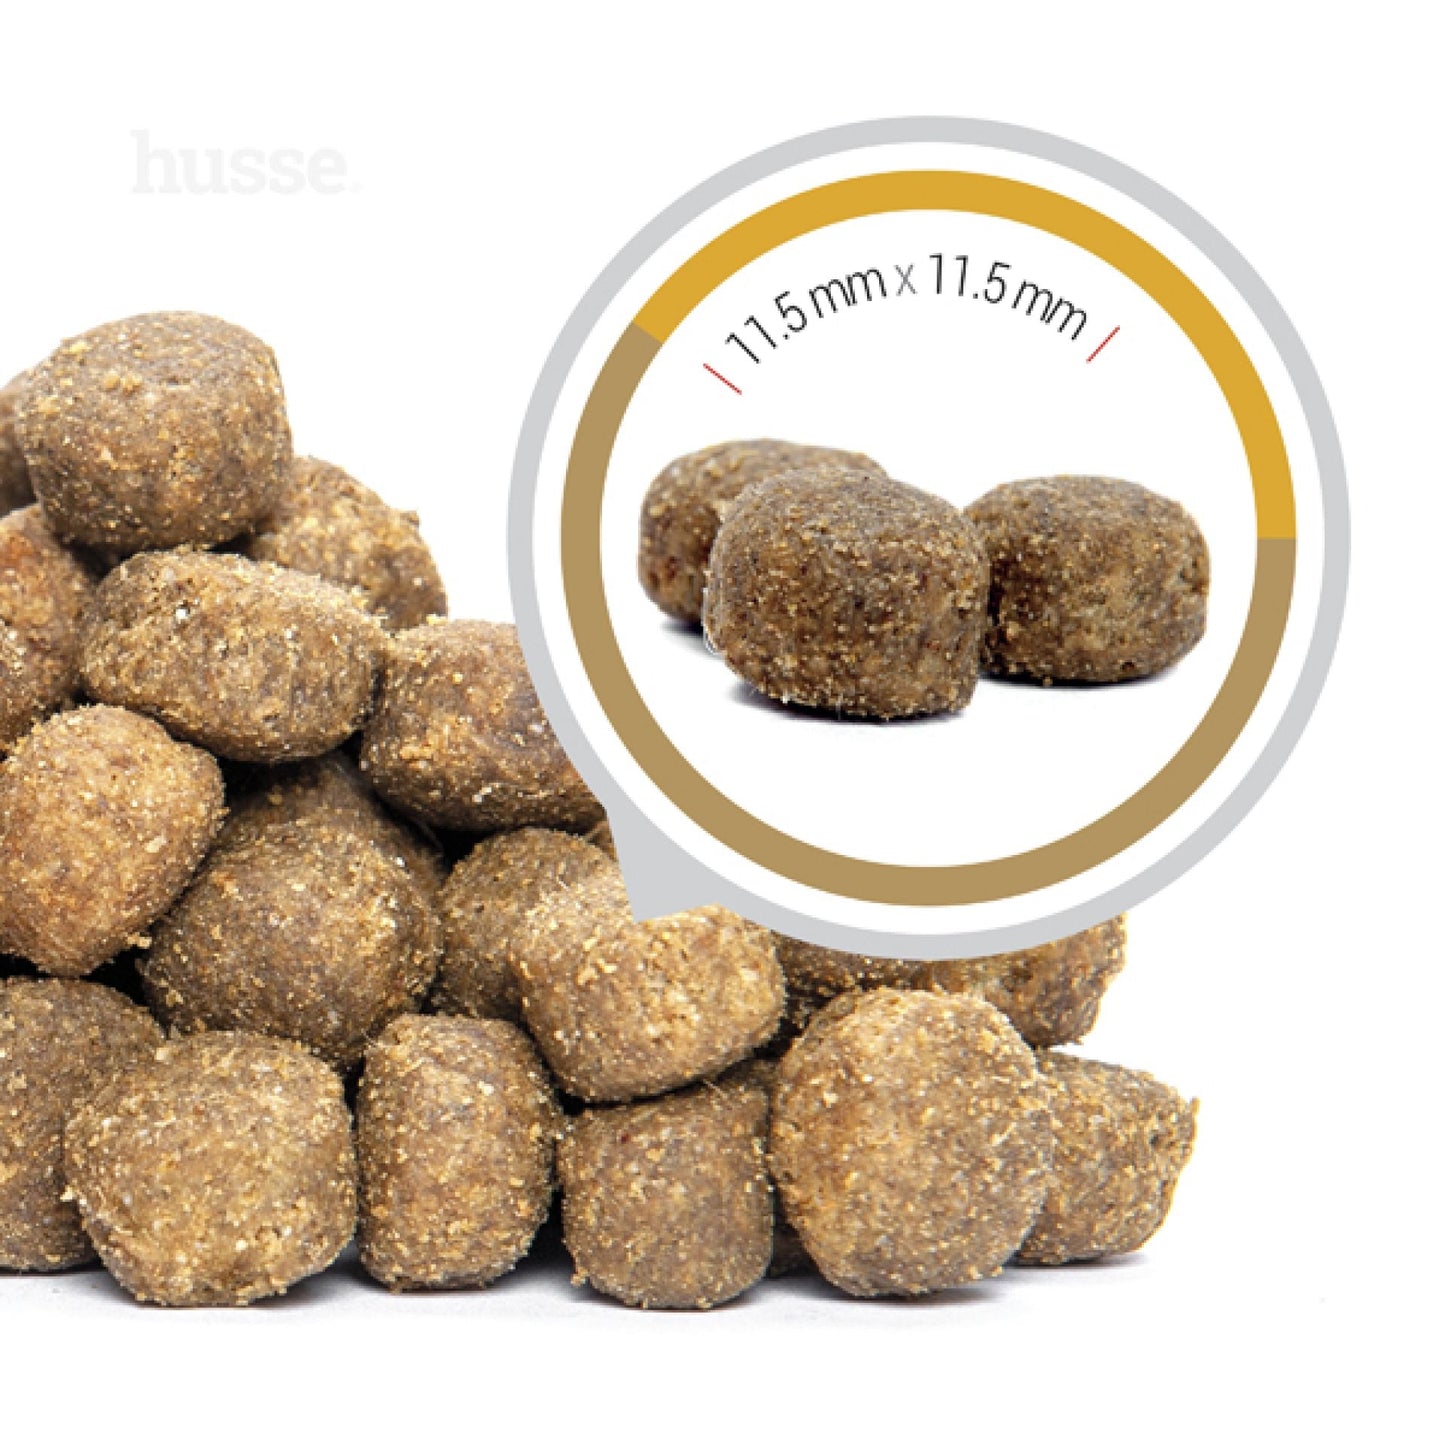 Opus Farm | Grain free kibbles with limited animal protein sources  (free sample - one pack per customer)